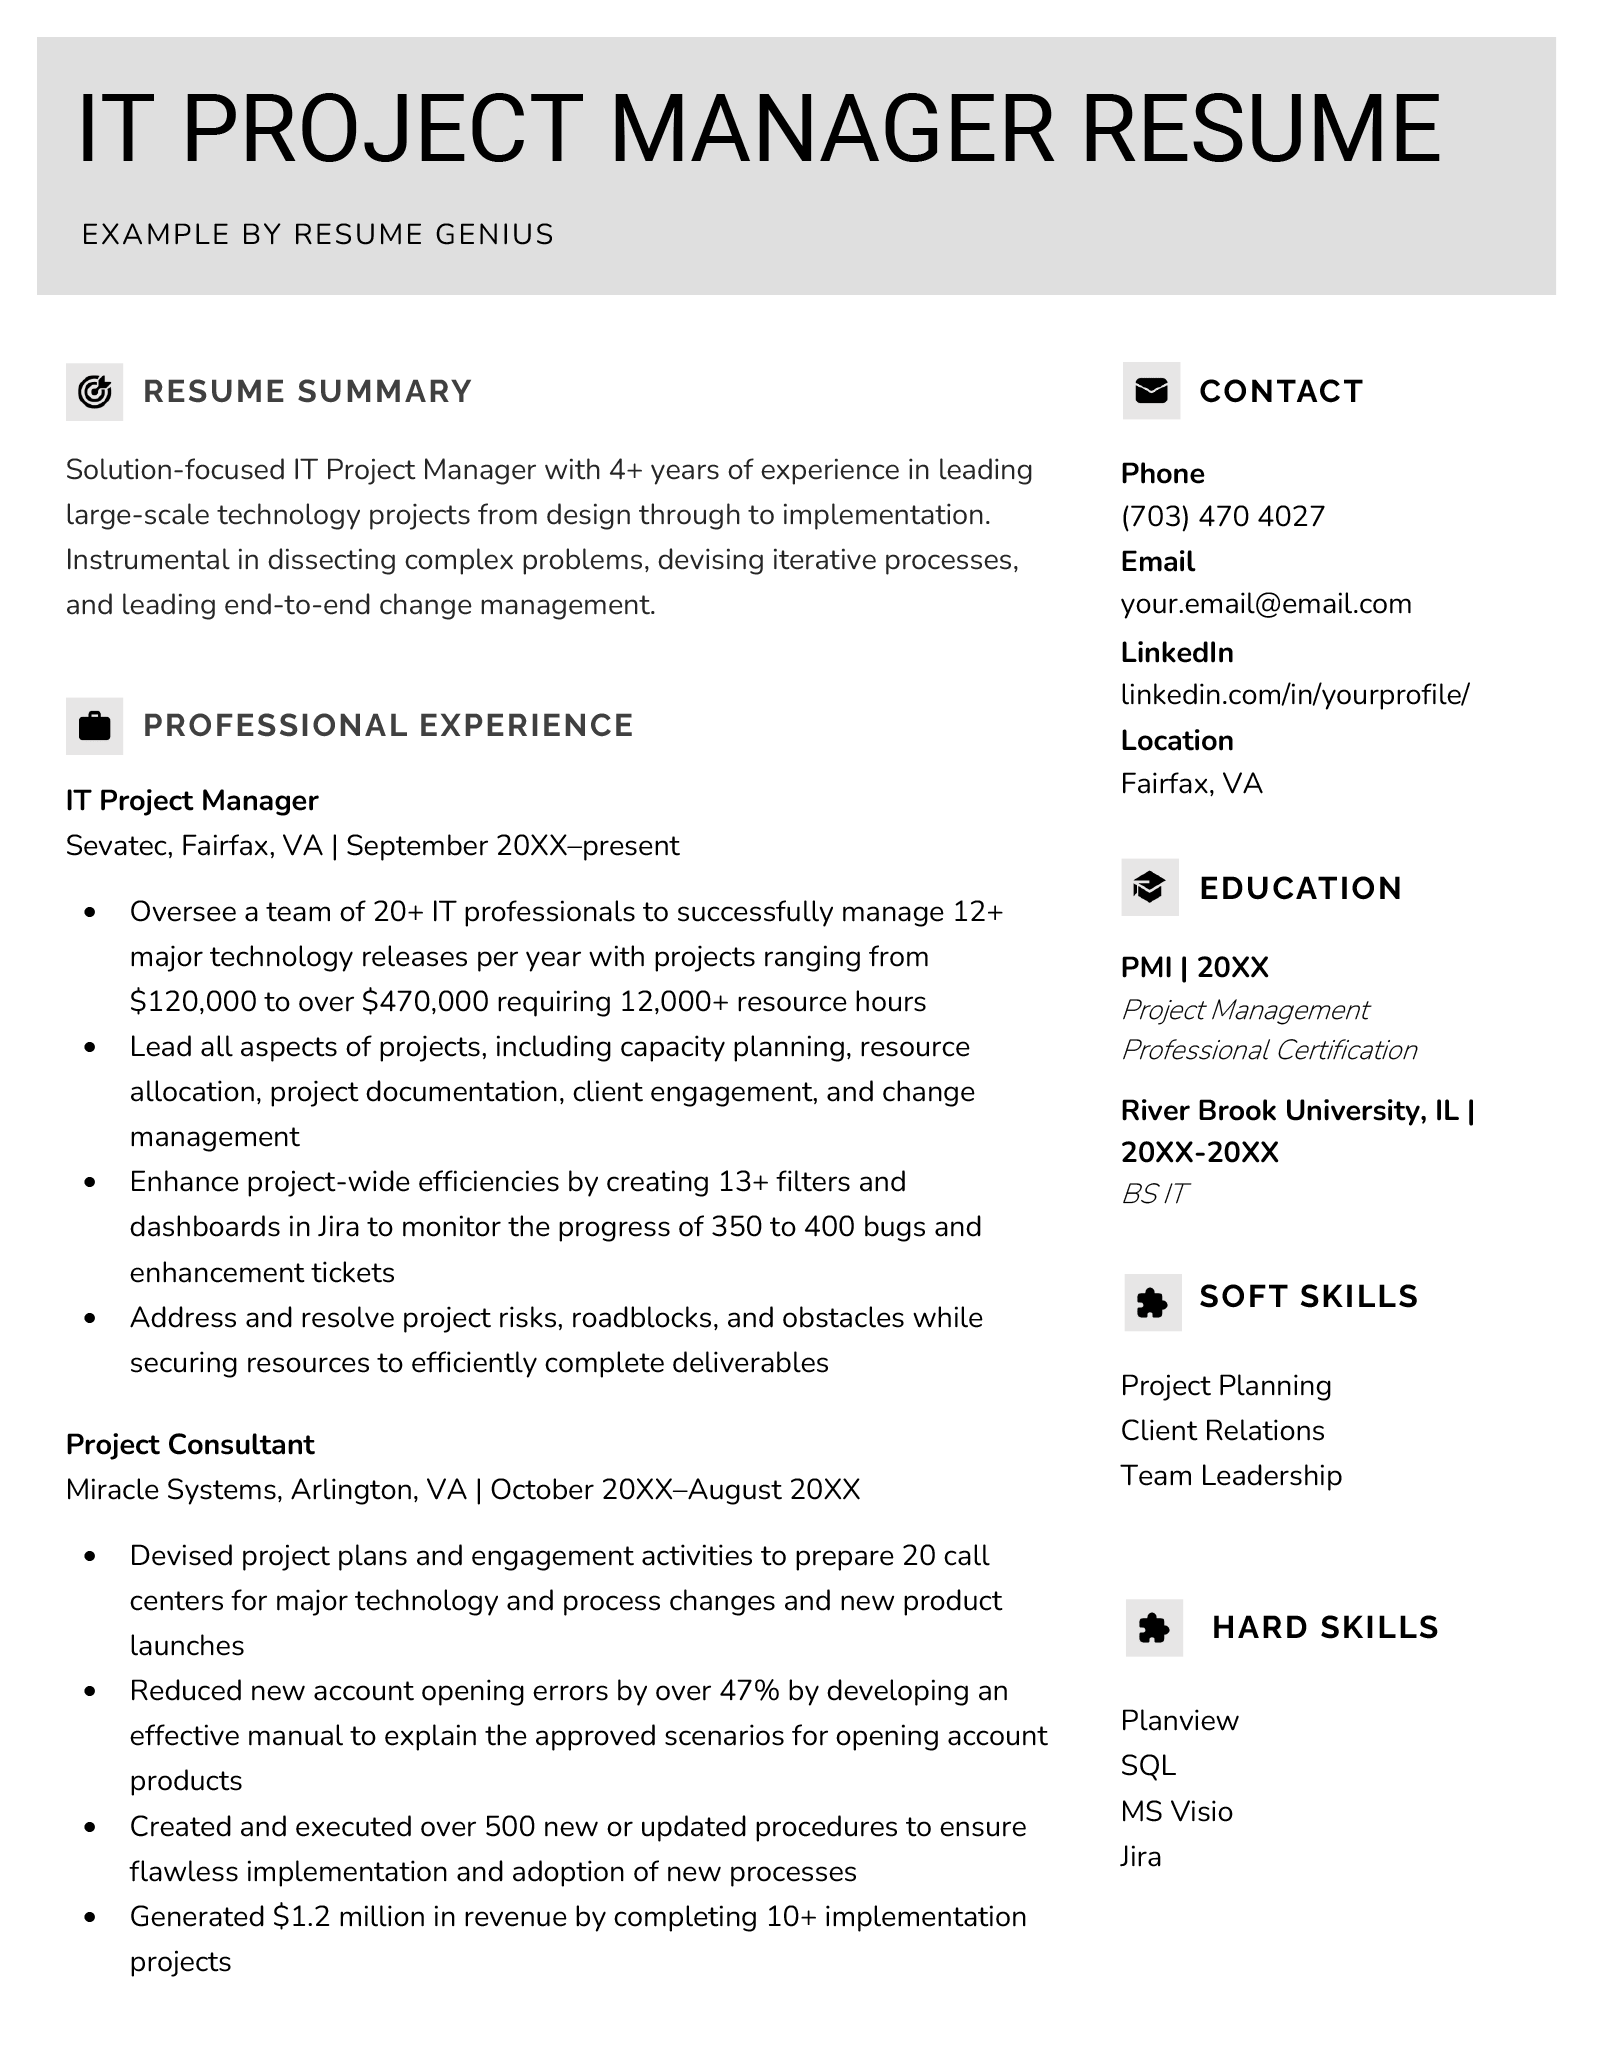 An IT project manager resume template with a gray header to make the applicant stand out